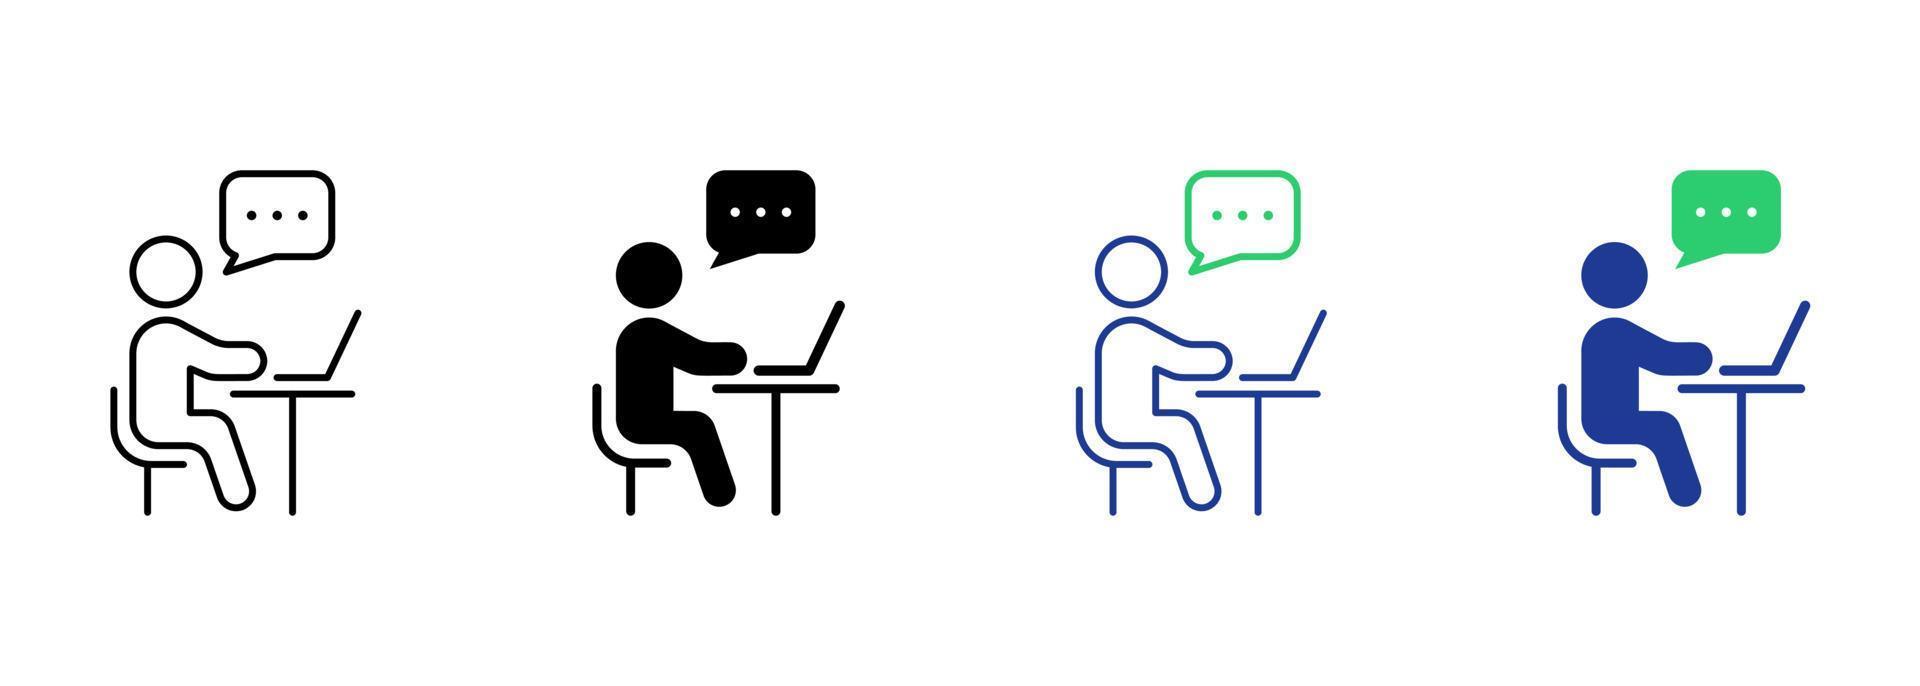 Person Sit and Use Computer Silhouette and Line Icon. Online Training Video Conference Chat on Laptop Pictogram. Virtual Webinar Meeting Discussion Icon. Editable Stroke. Isolated Vector Illustration.